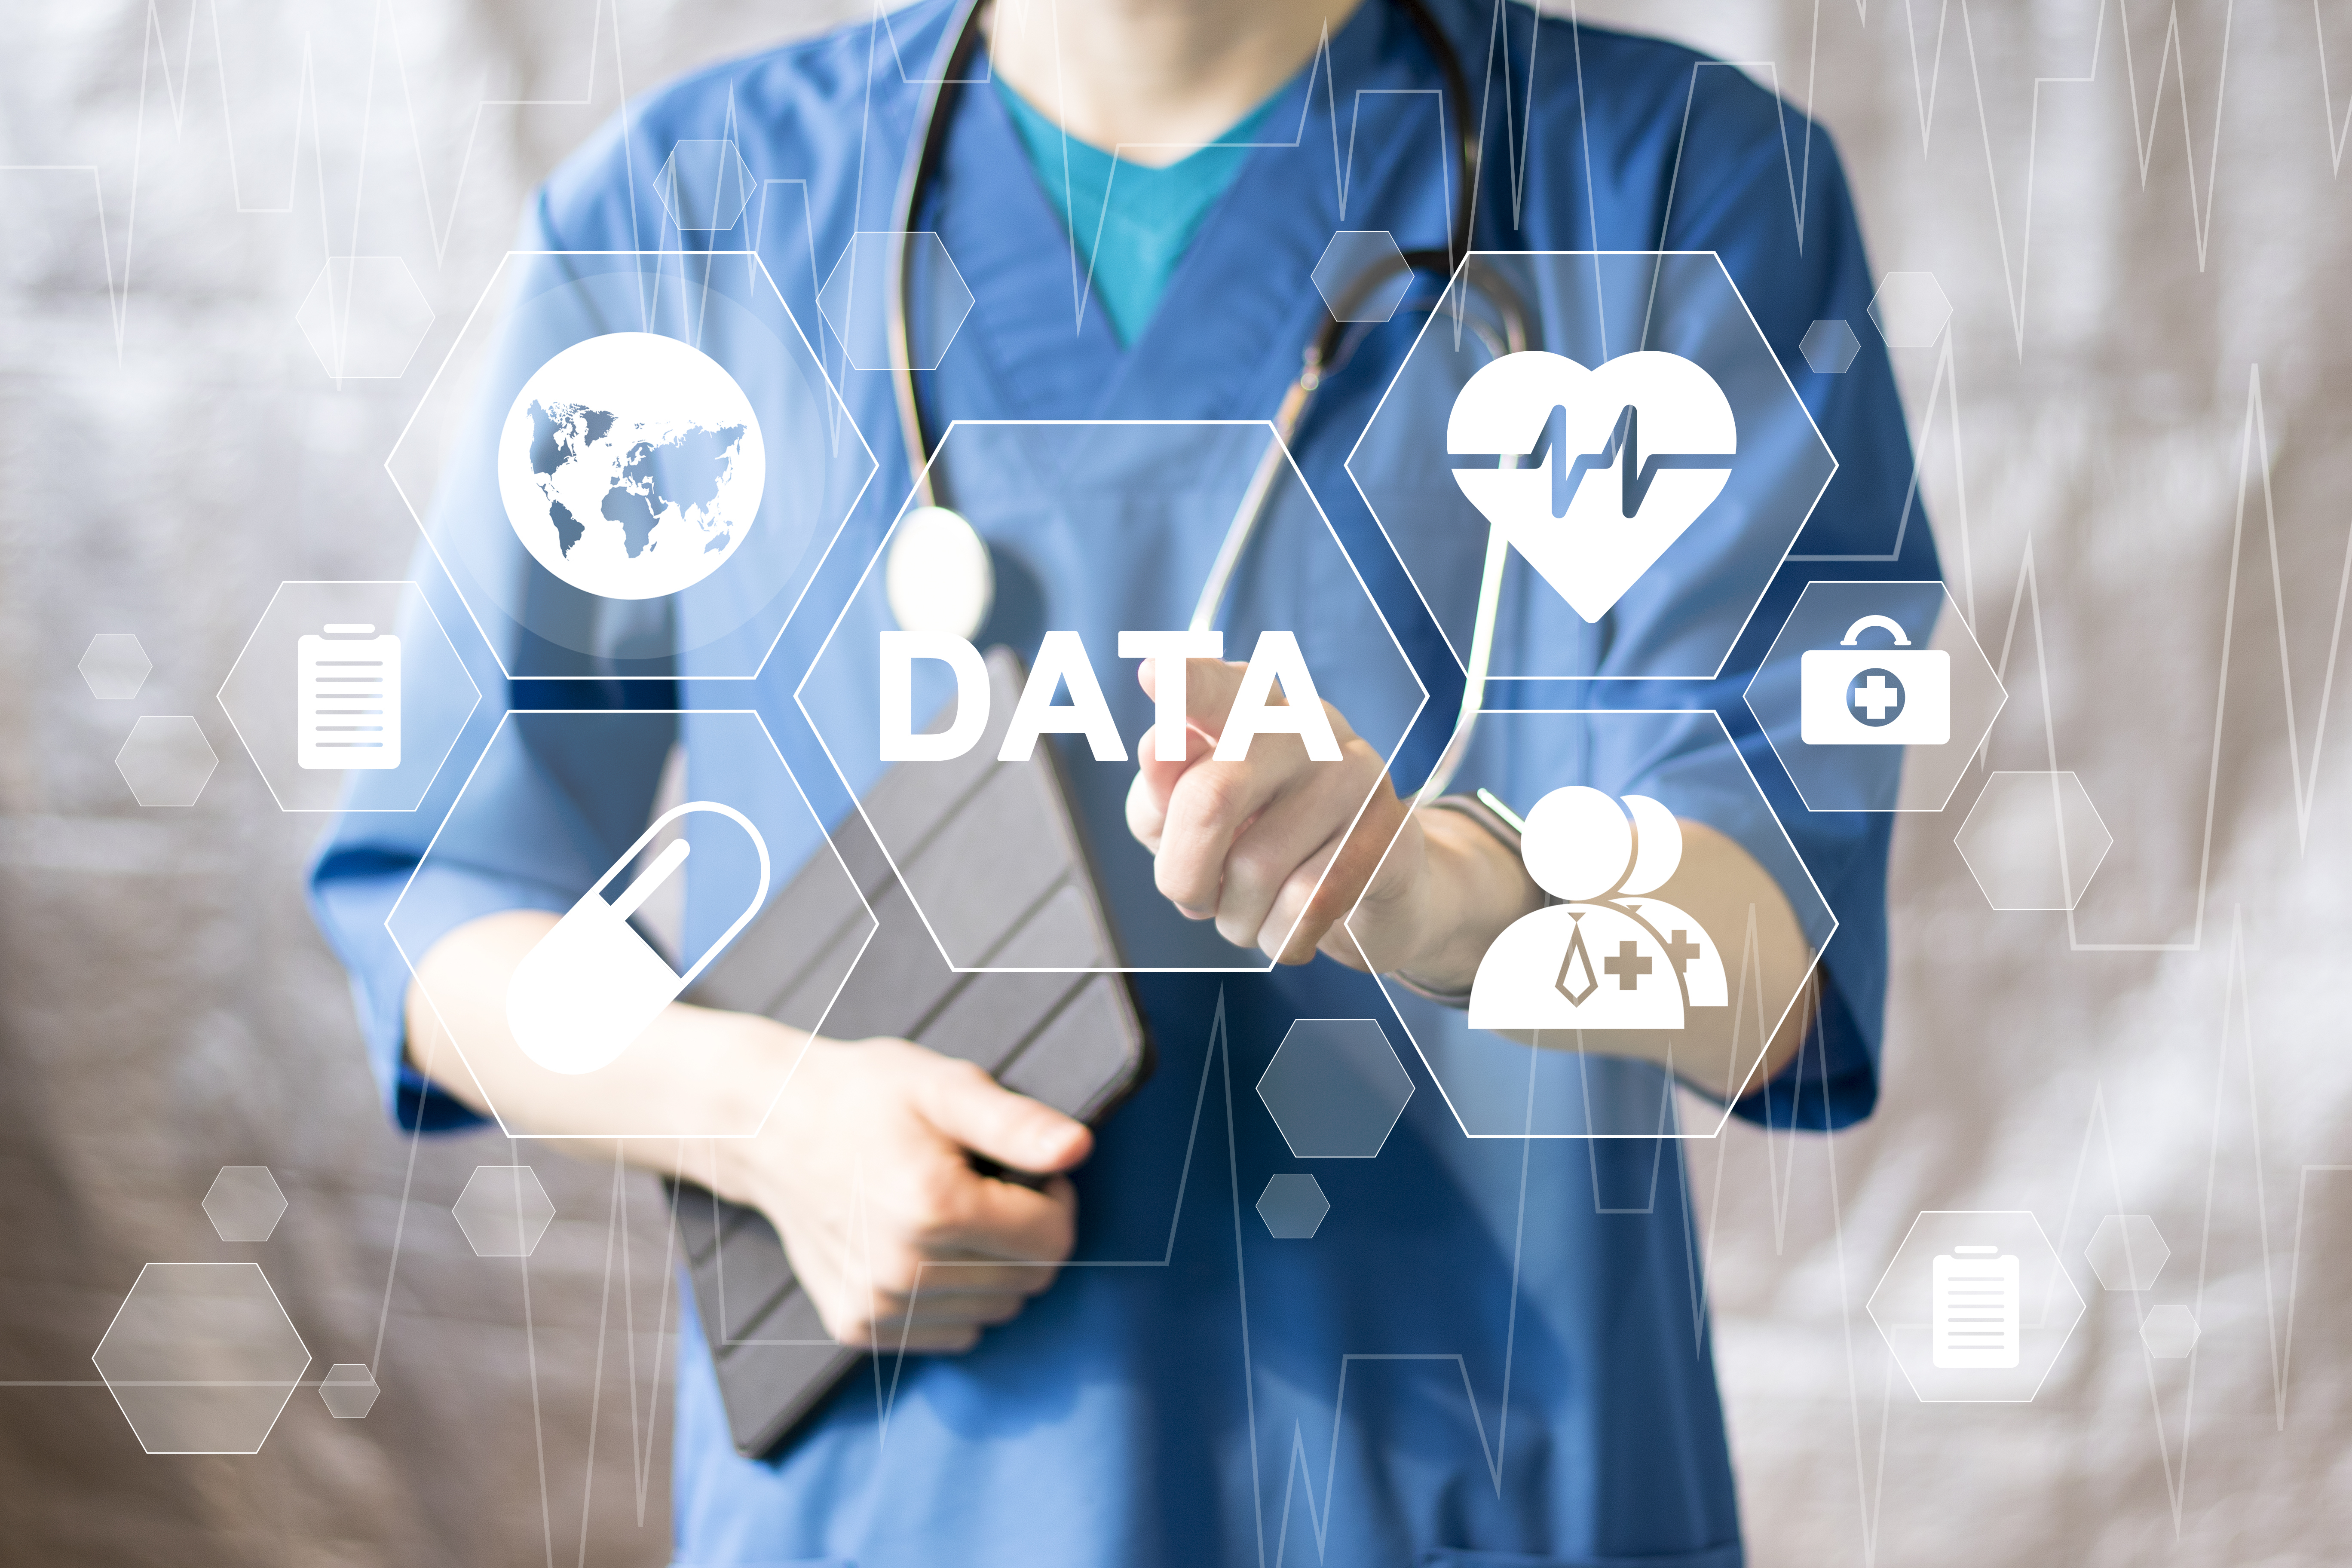 Data Context is an Important Catalyst for Healthcare IoT